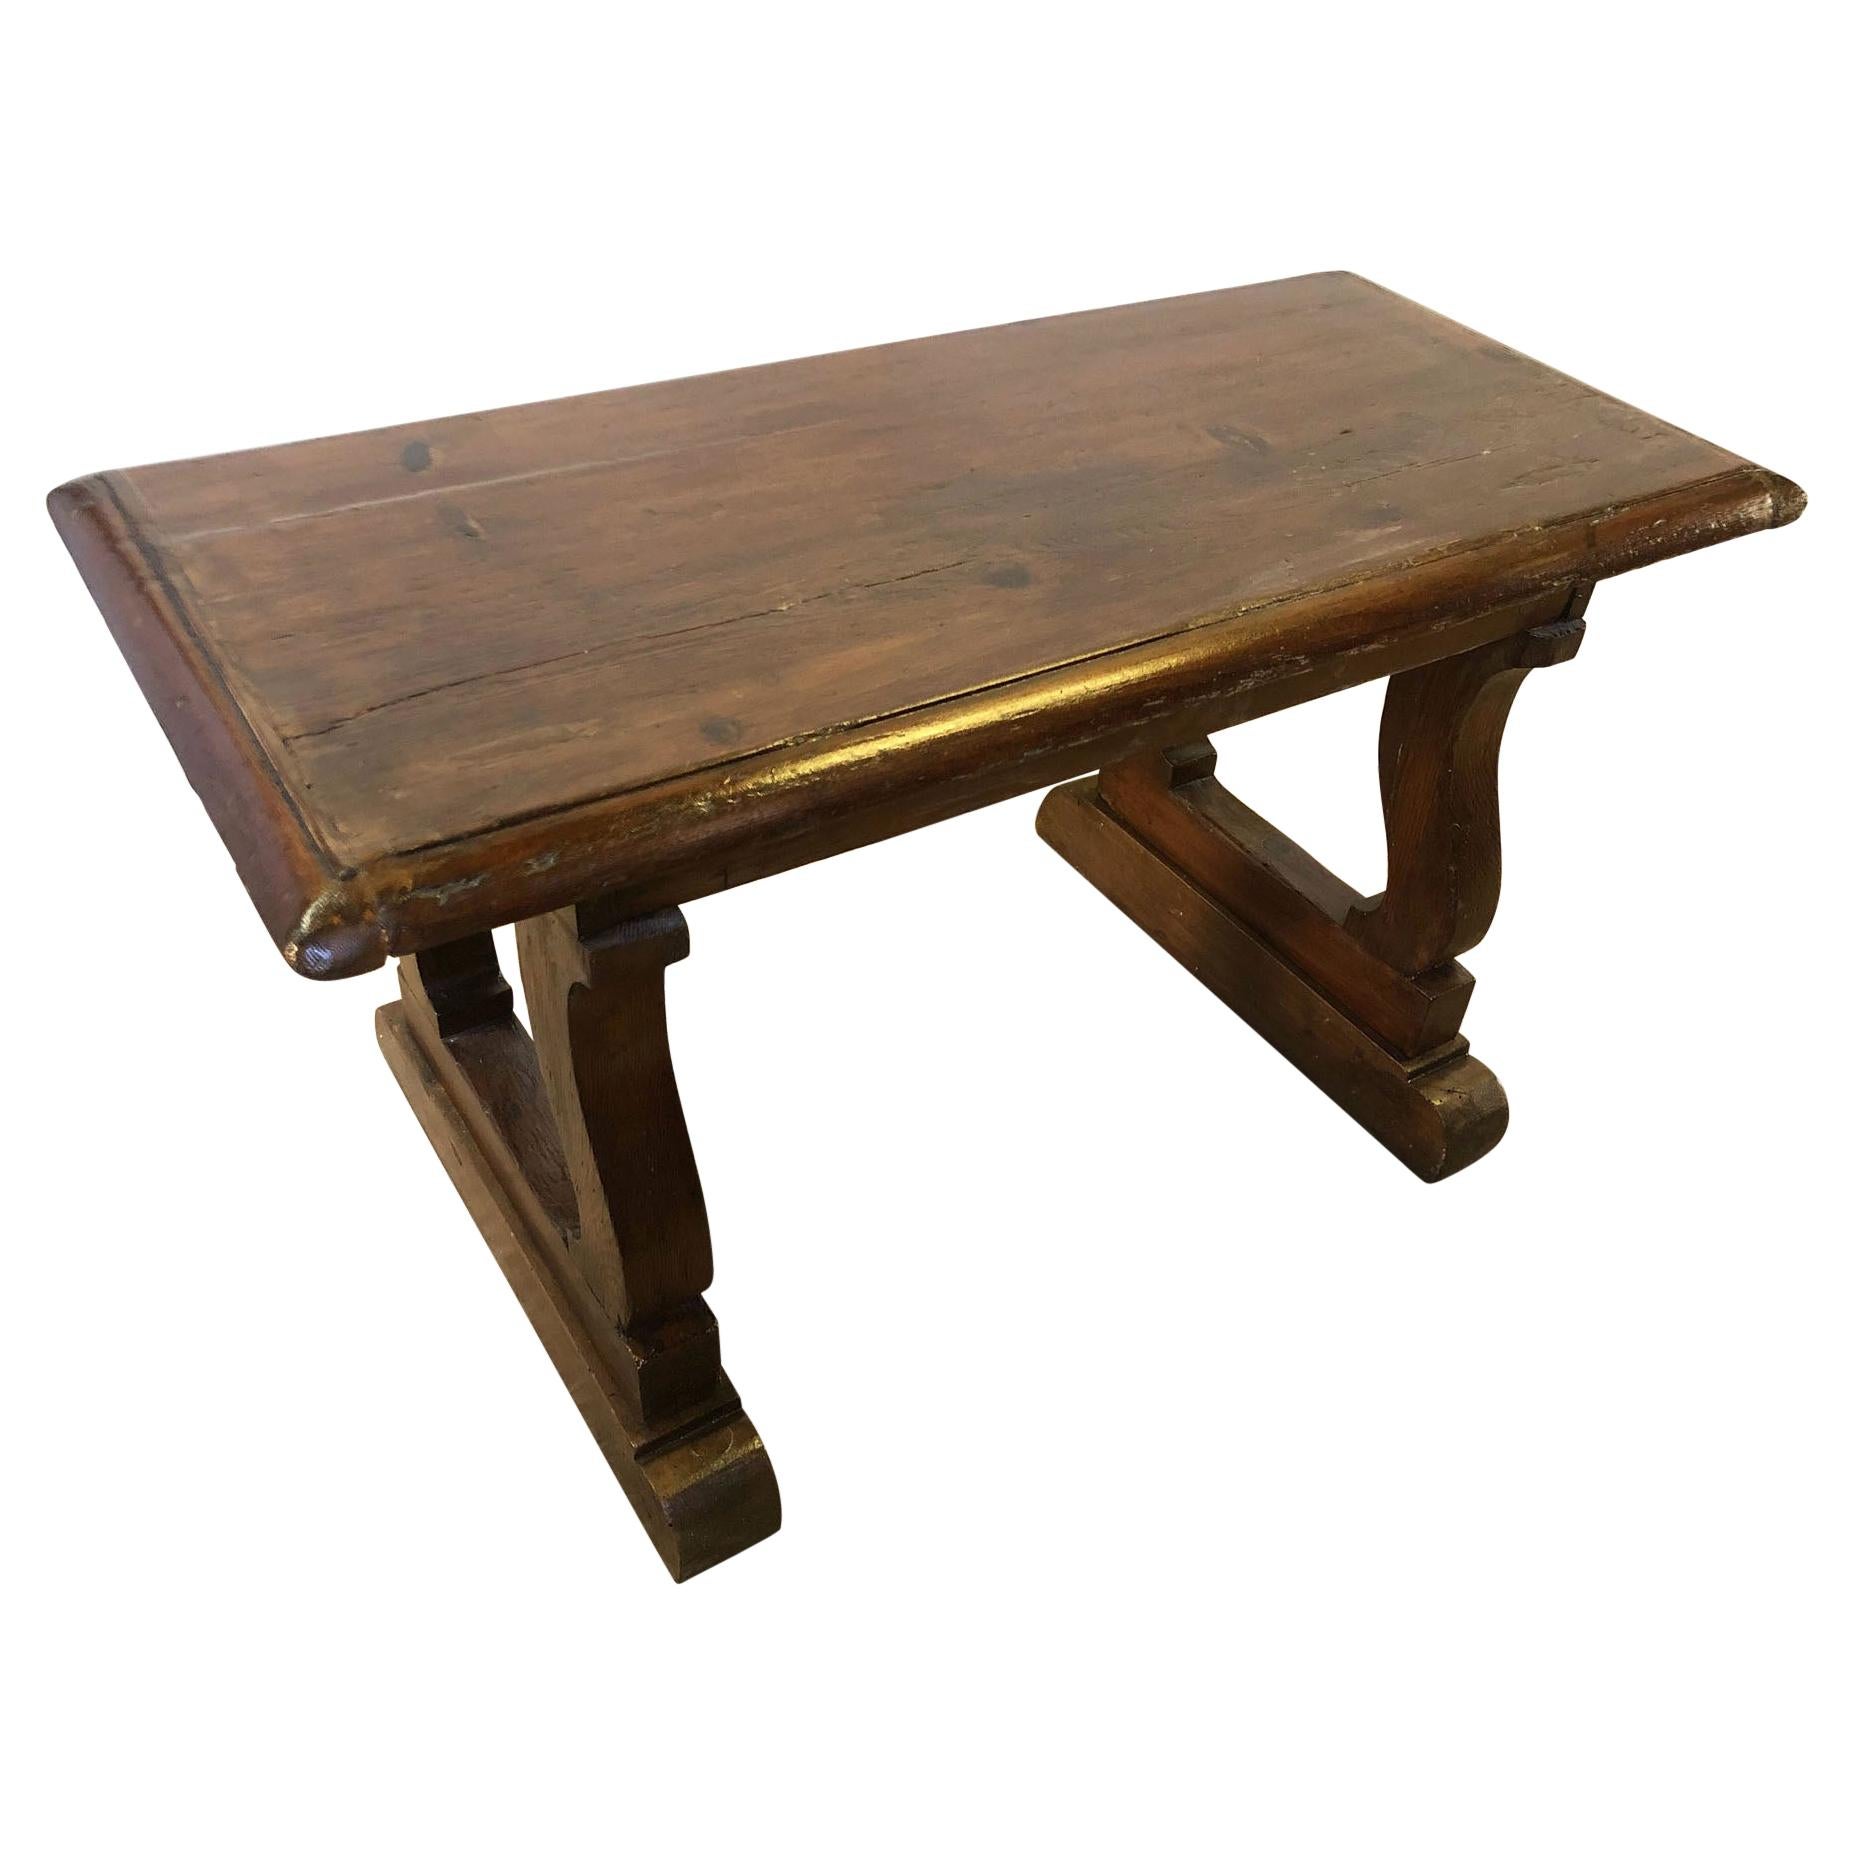 Italian Sofa Table from 1900 in Solid Fir, Very Sturdy, Honey Color, Rustic